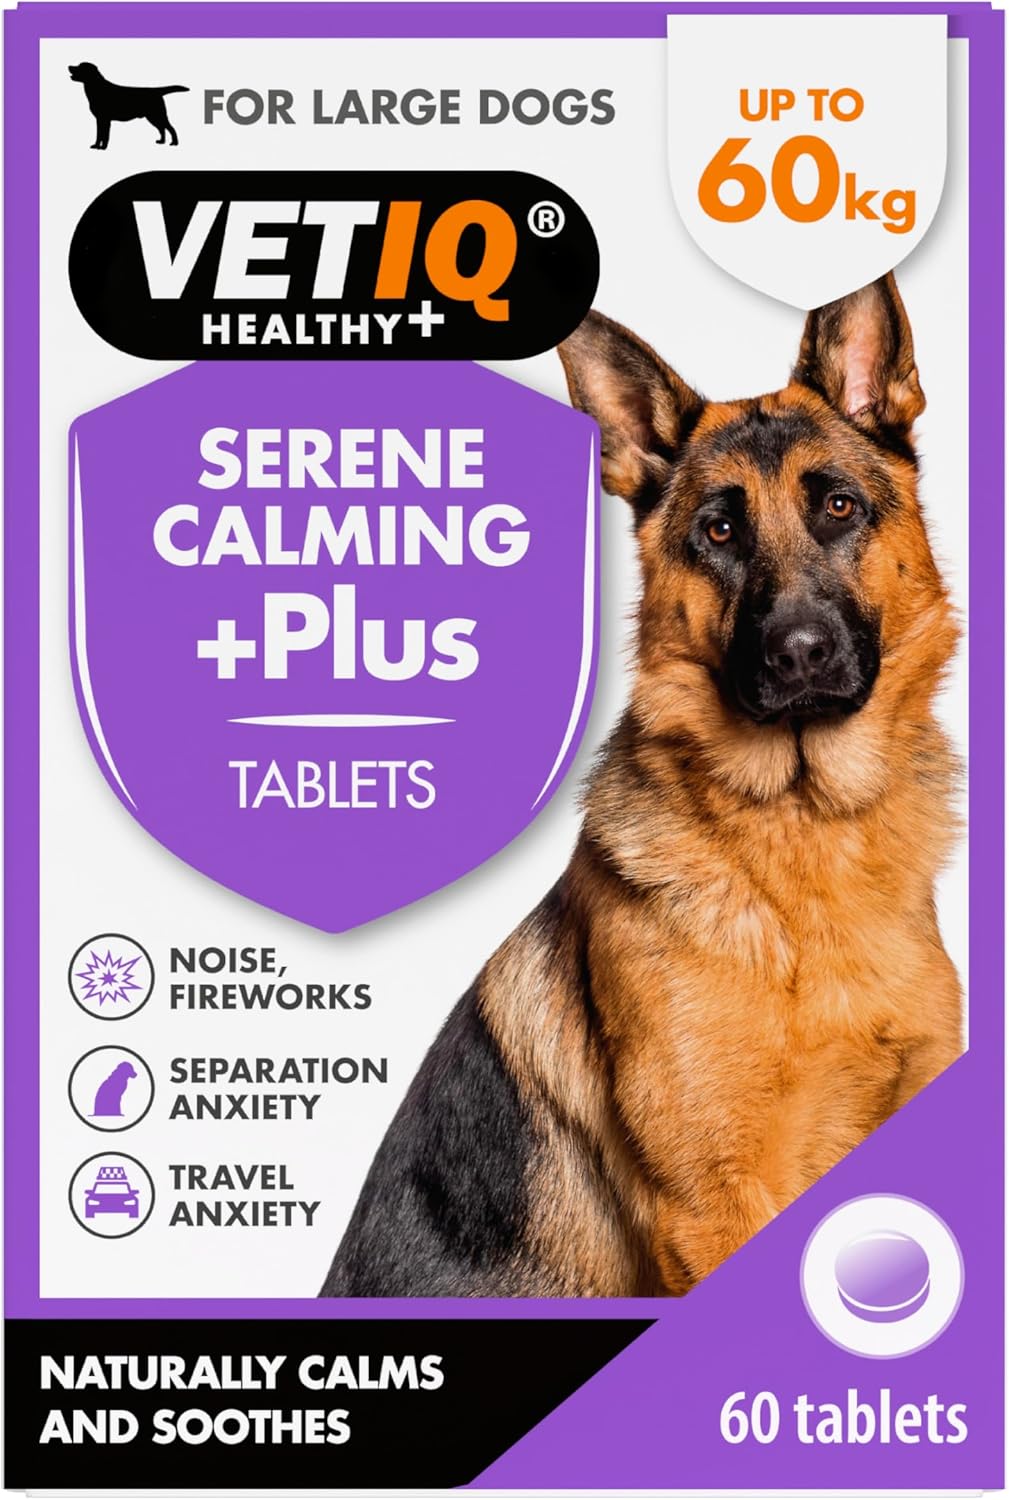 VETIQ Serene Calming Plus+ Tablets For Large Dogs, Helps to Reduce Anxiety in All Scenarios Short & Long Term , 60 Tablets?24913/3566